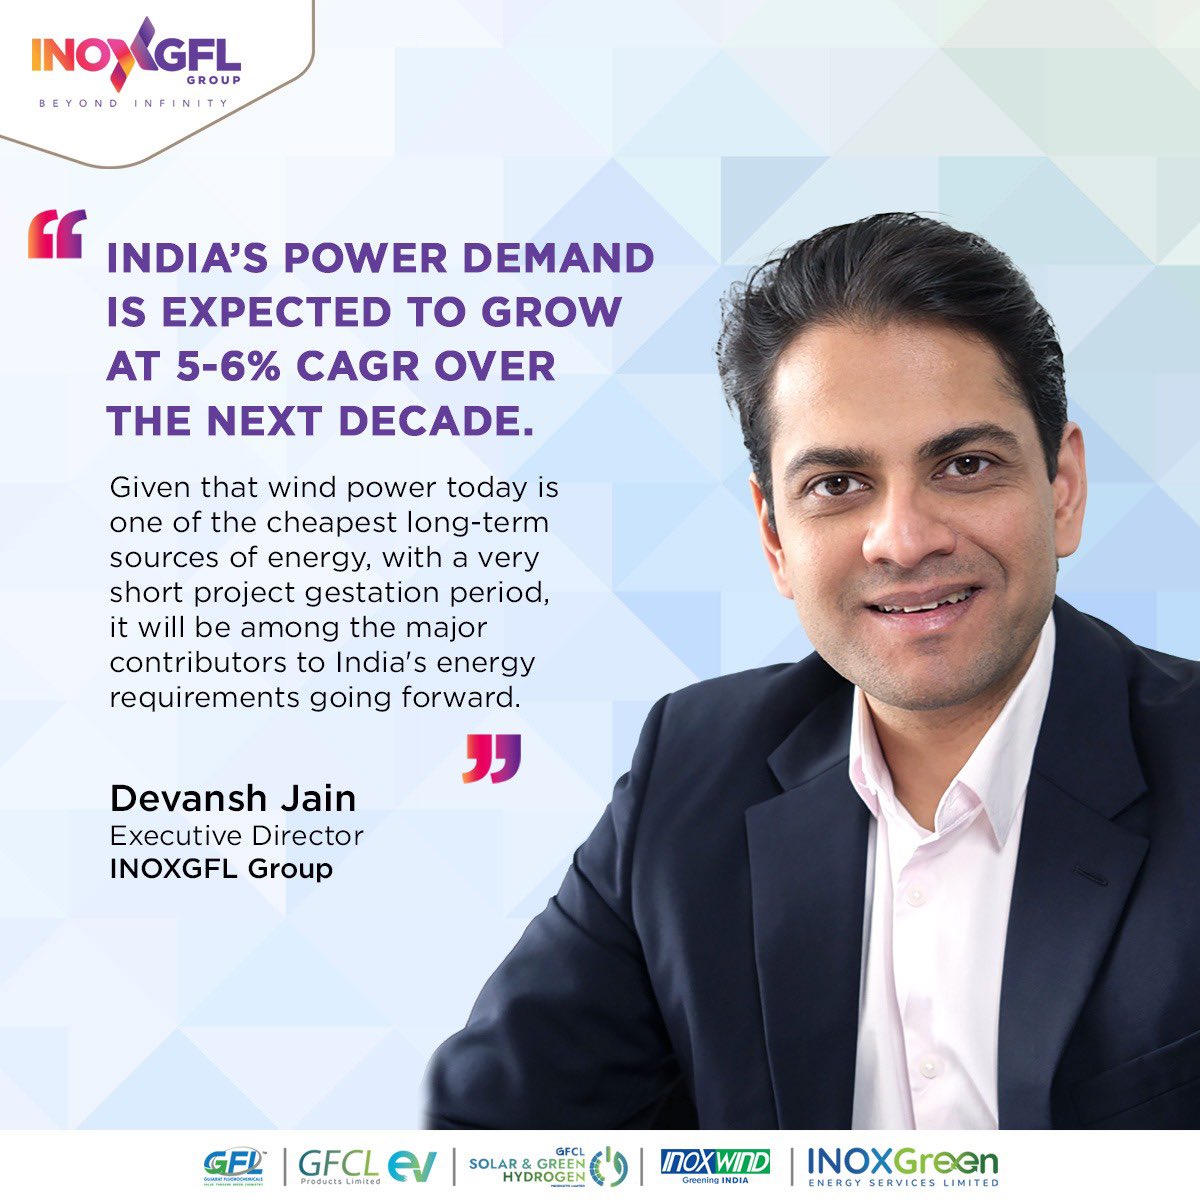 With the GWEC positioning India as the second-largest wind market in the Asia-Pacific region, the country is expected to reach an installed capacity of 122 GW by 2031-2032. Devansh Jain, ED-INOXGFL Group, sheds light on the GoI’s policy framework and the key role of wind power in